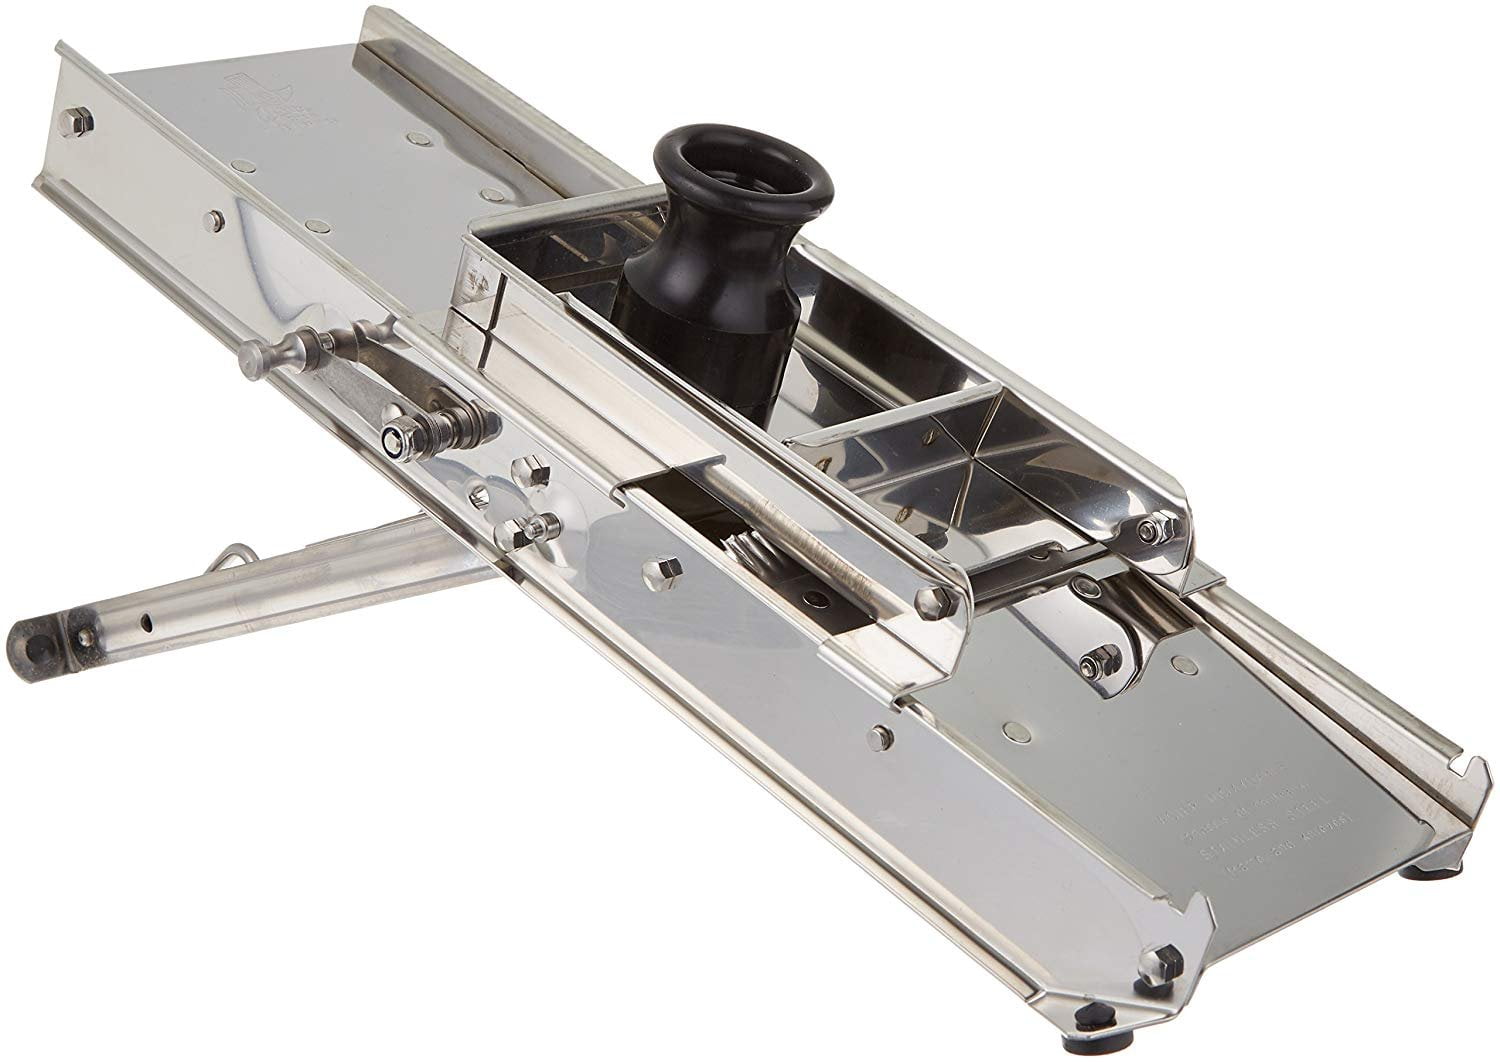 Bron Coucke Stainless Steel Bron Mandolin Slicer Without Pusher 215030